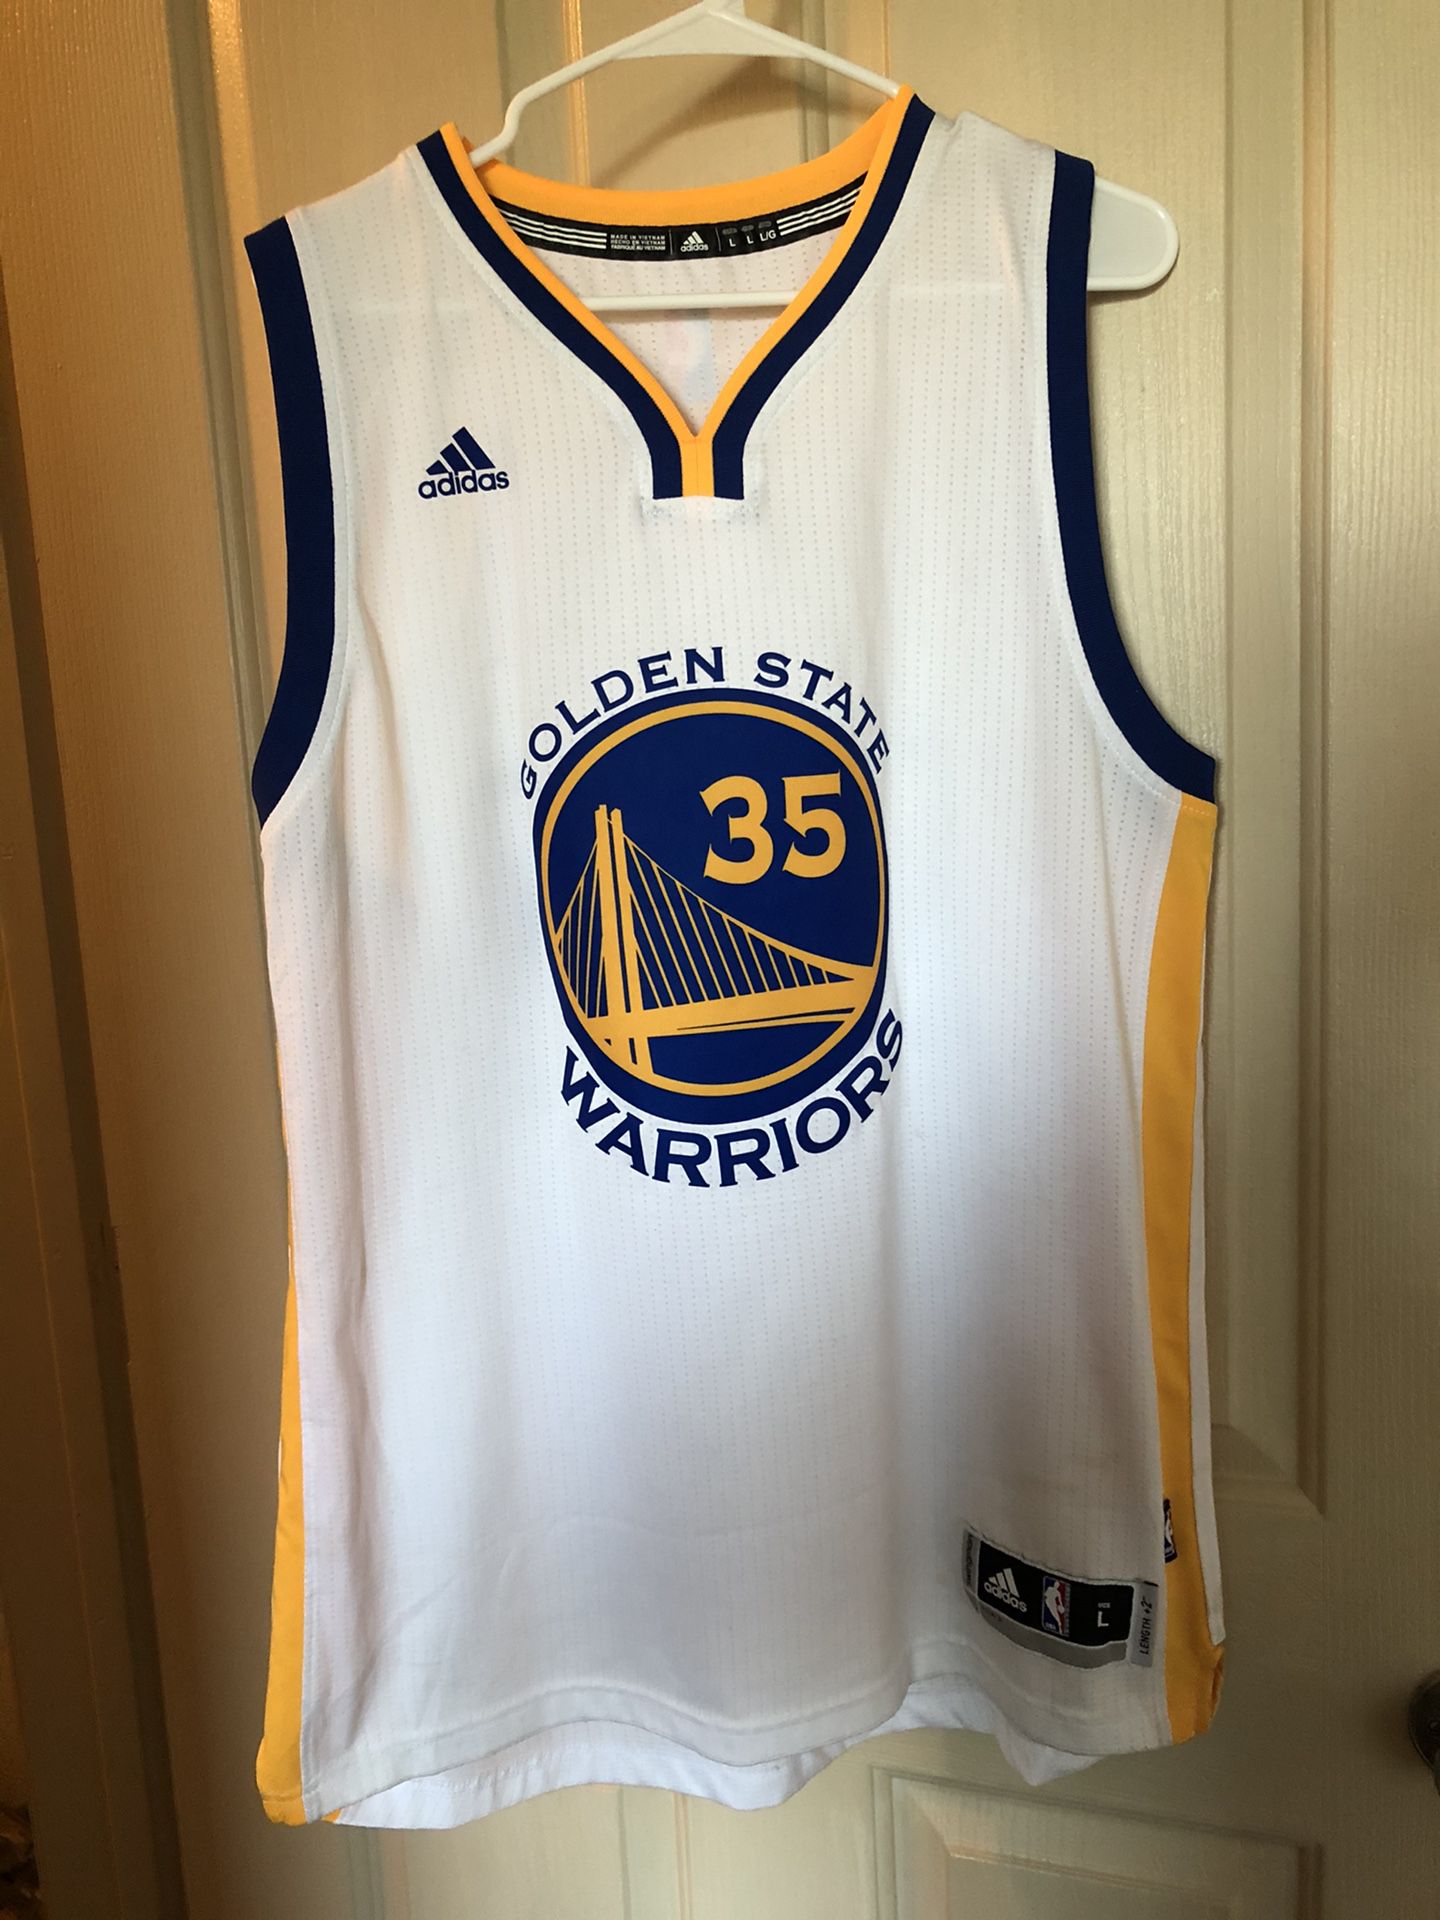 Adidas Swingman Jersey. Kevin Durant former Golden State Warrior and 2x NBA Champion. Size Men’s Large